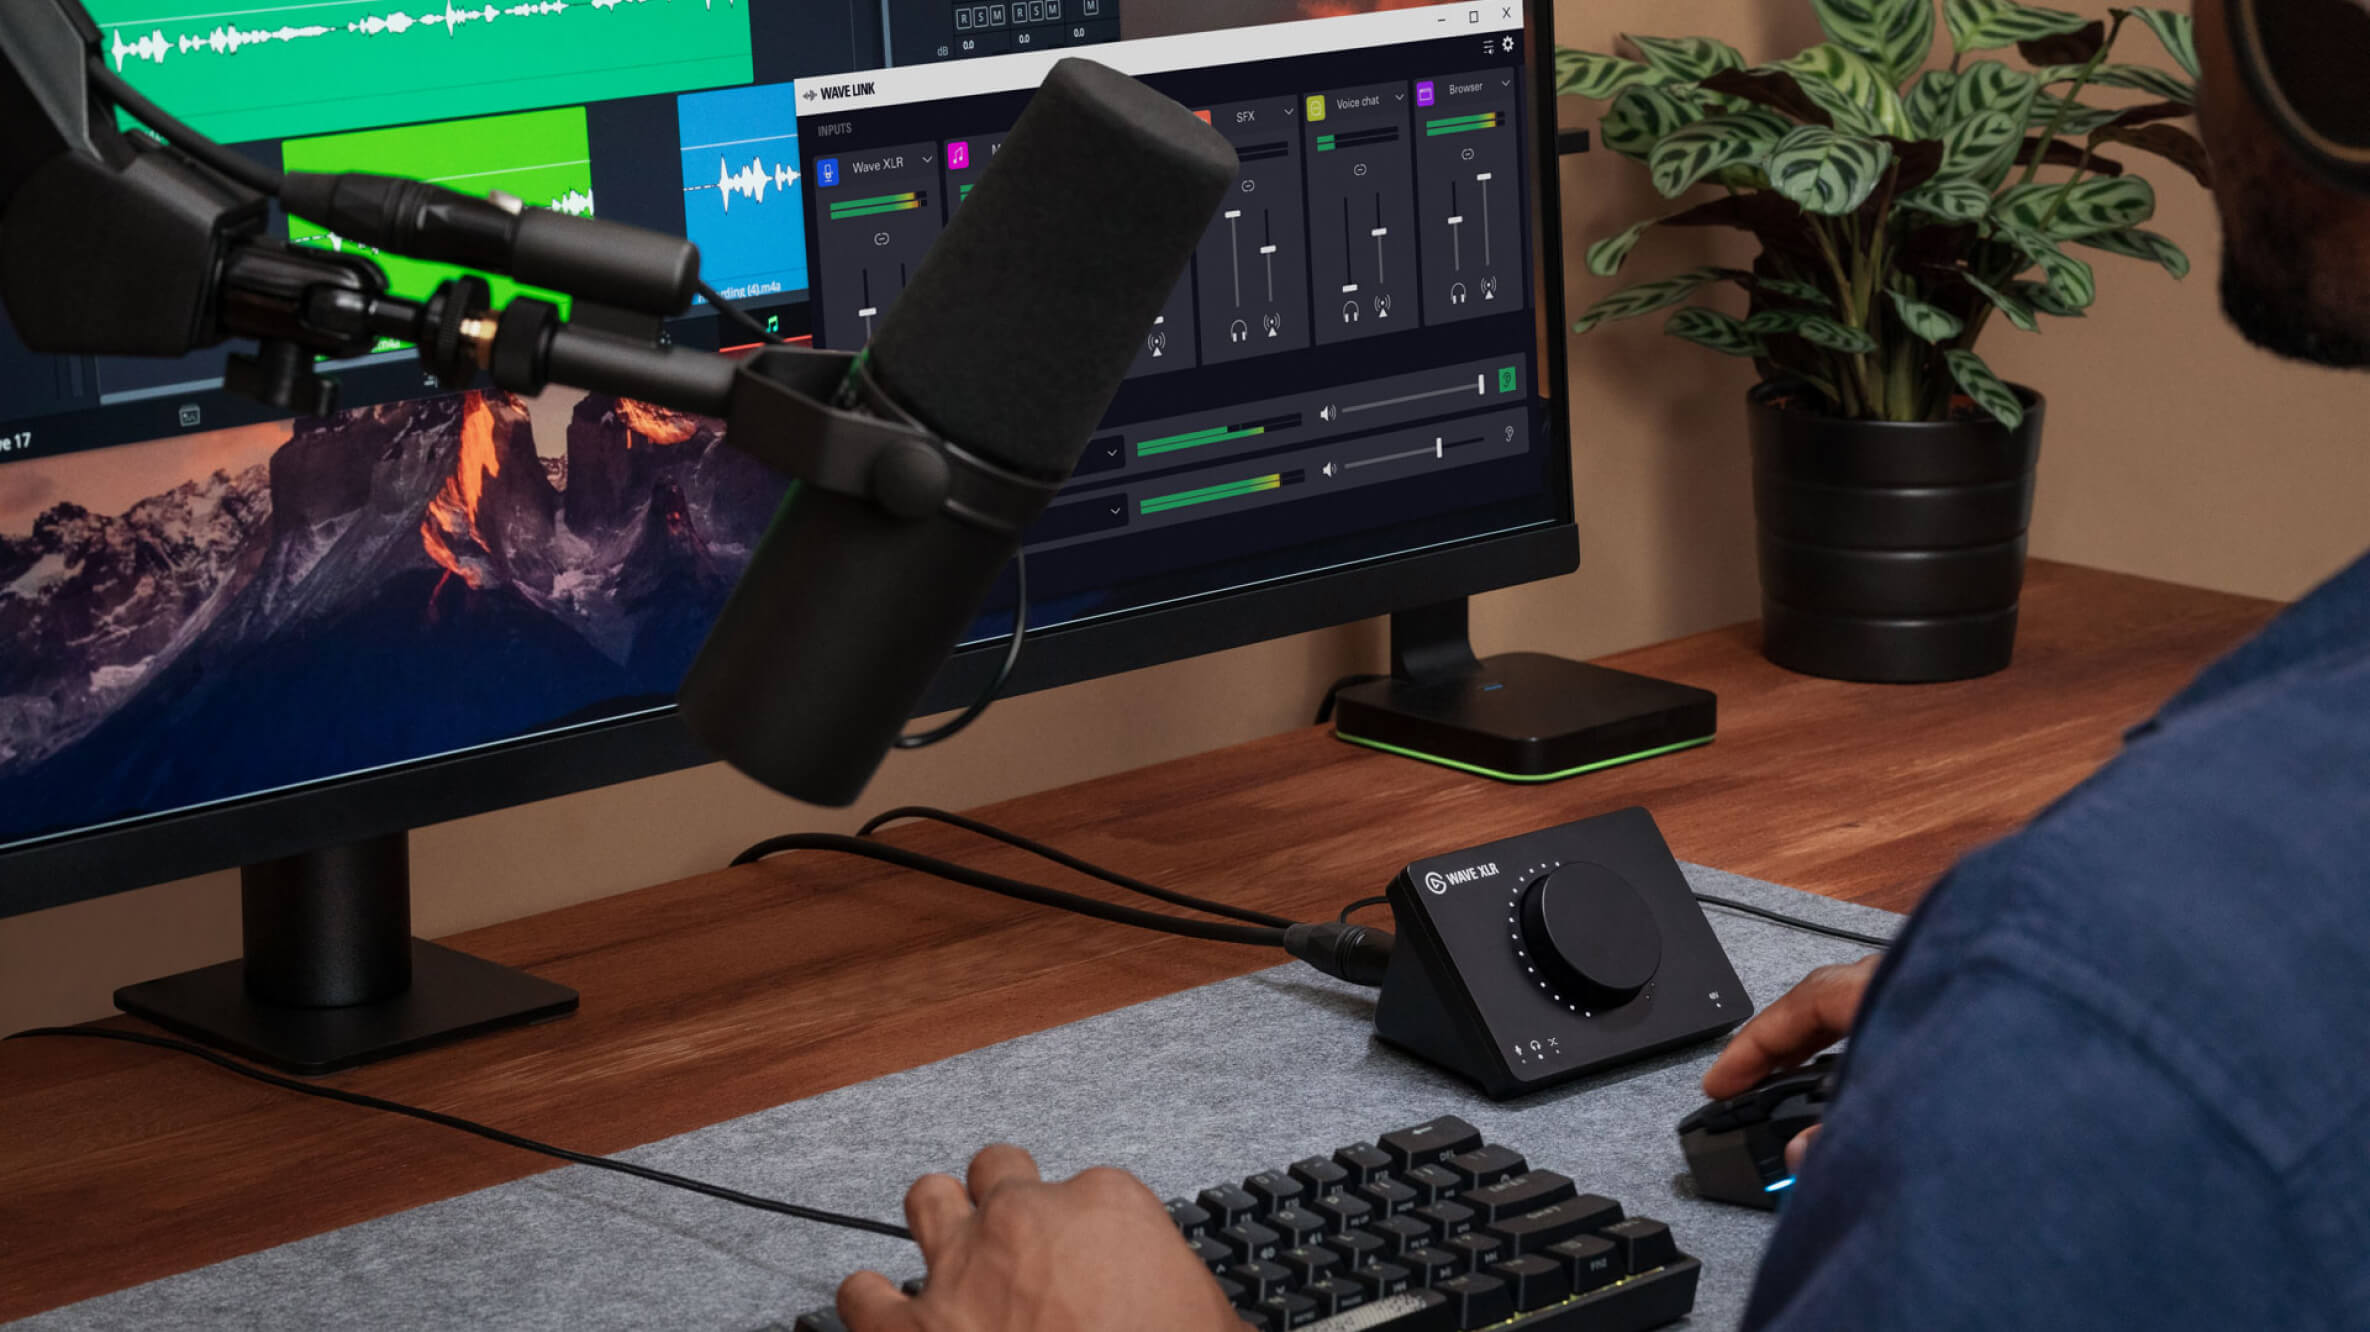 Elgato Wave:3 microphone review: Go live and get loud